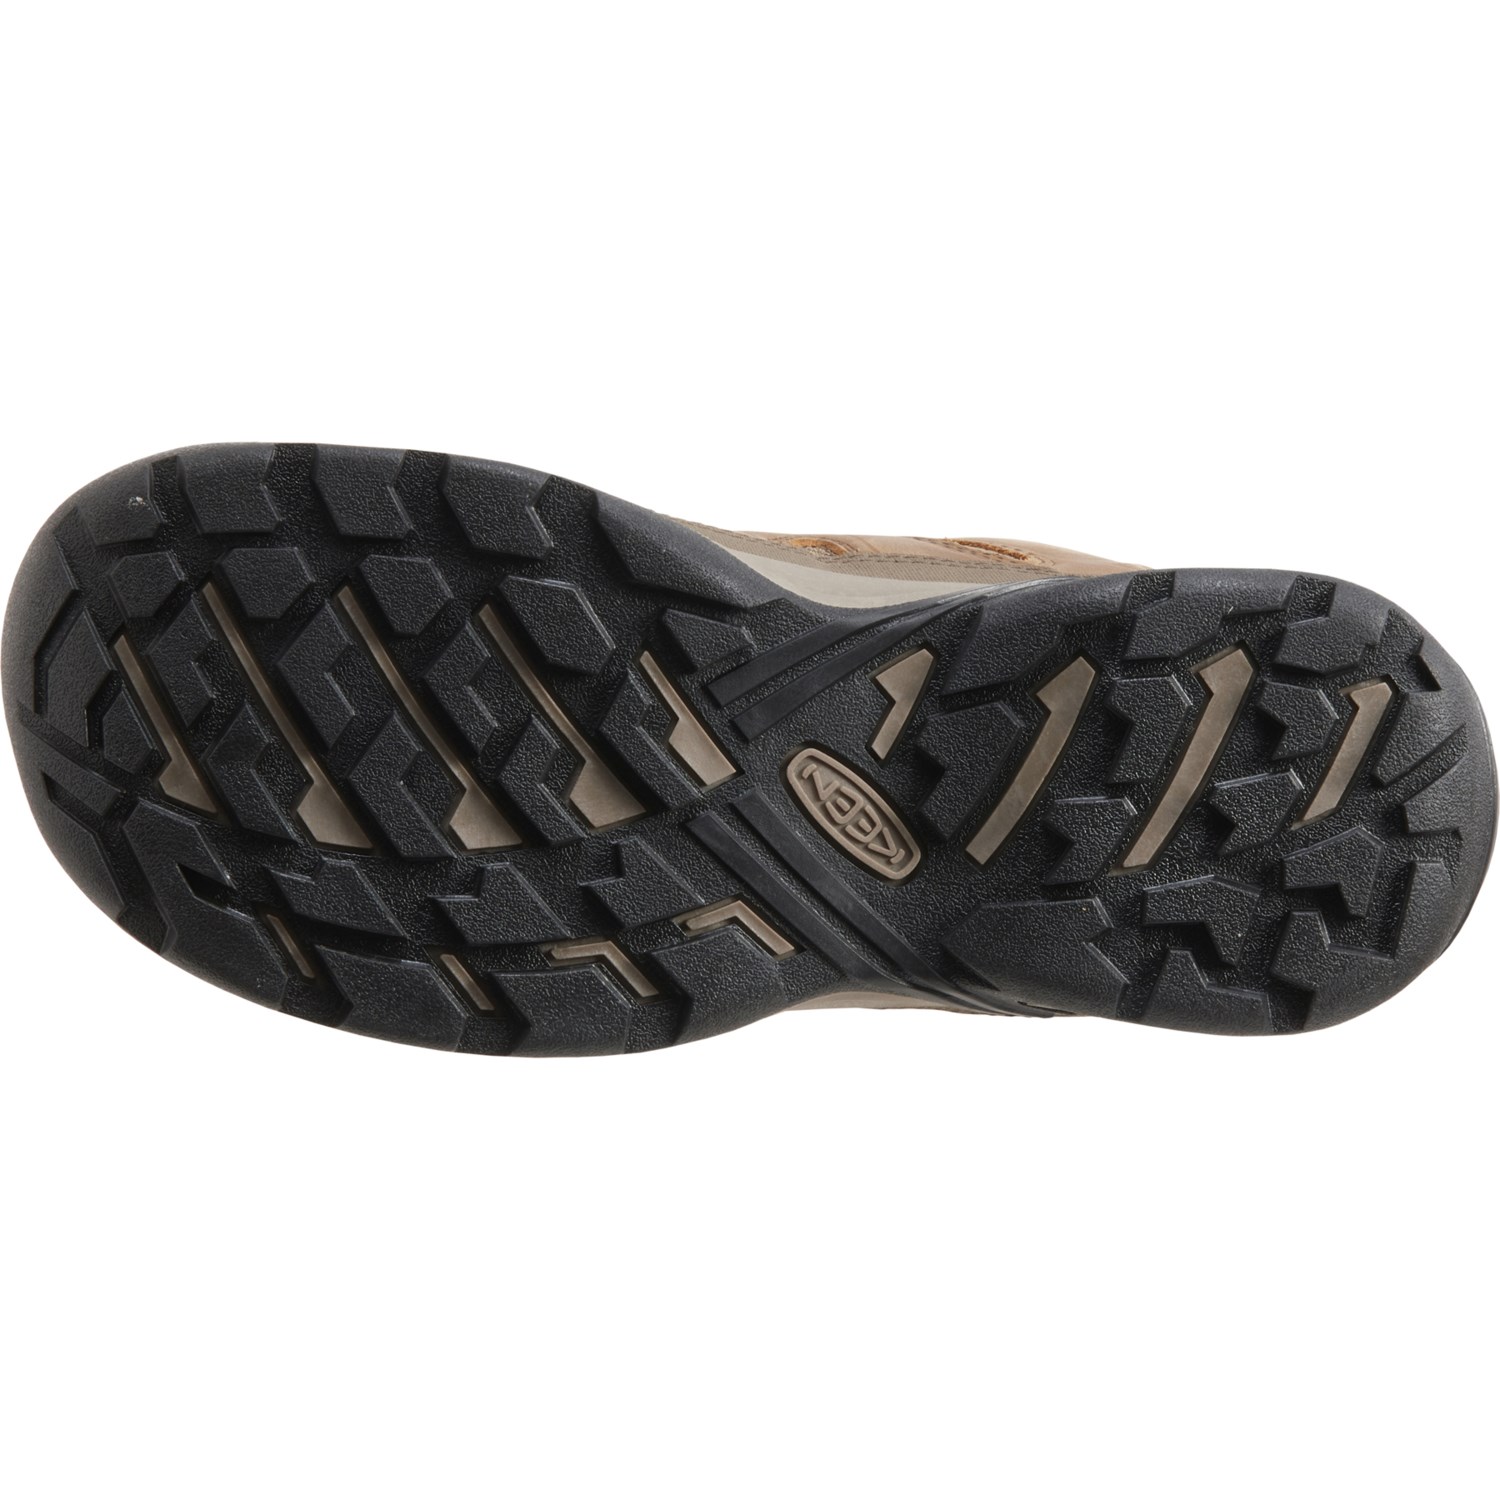 Keen Circadia Mid Hiking Boots (For Women) - Save 36%